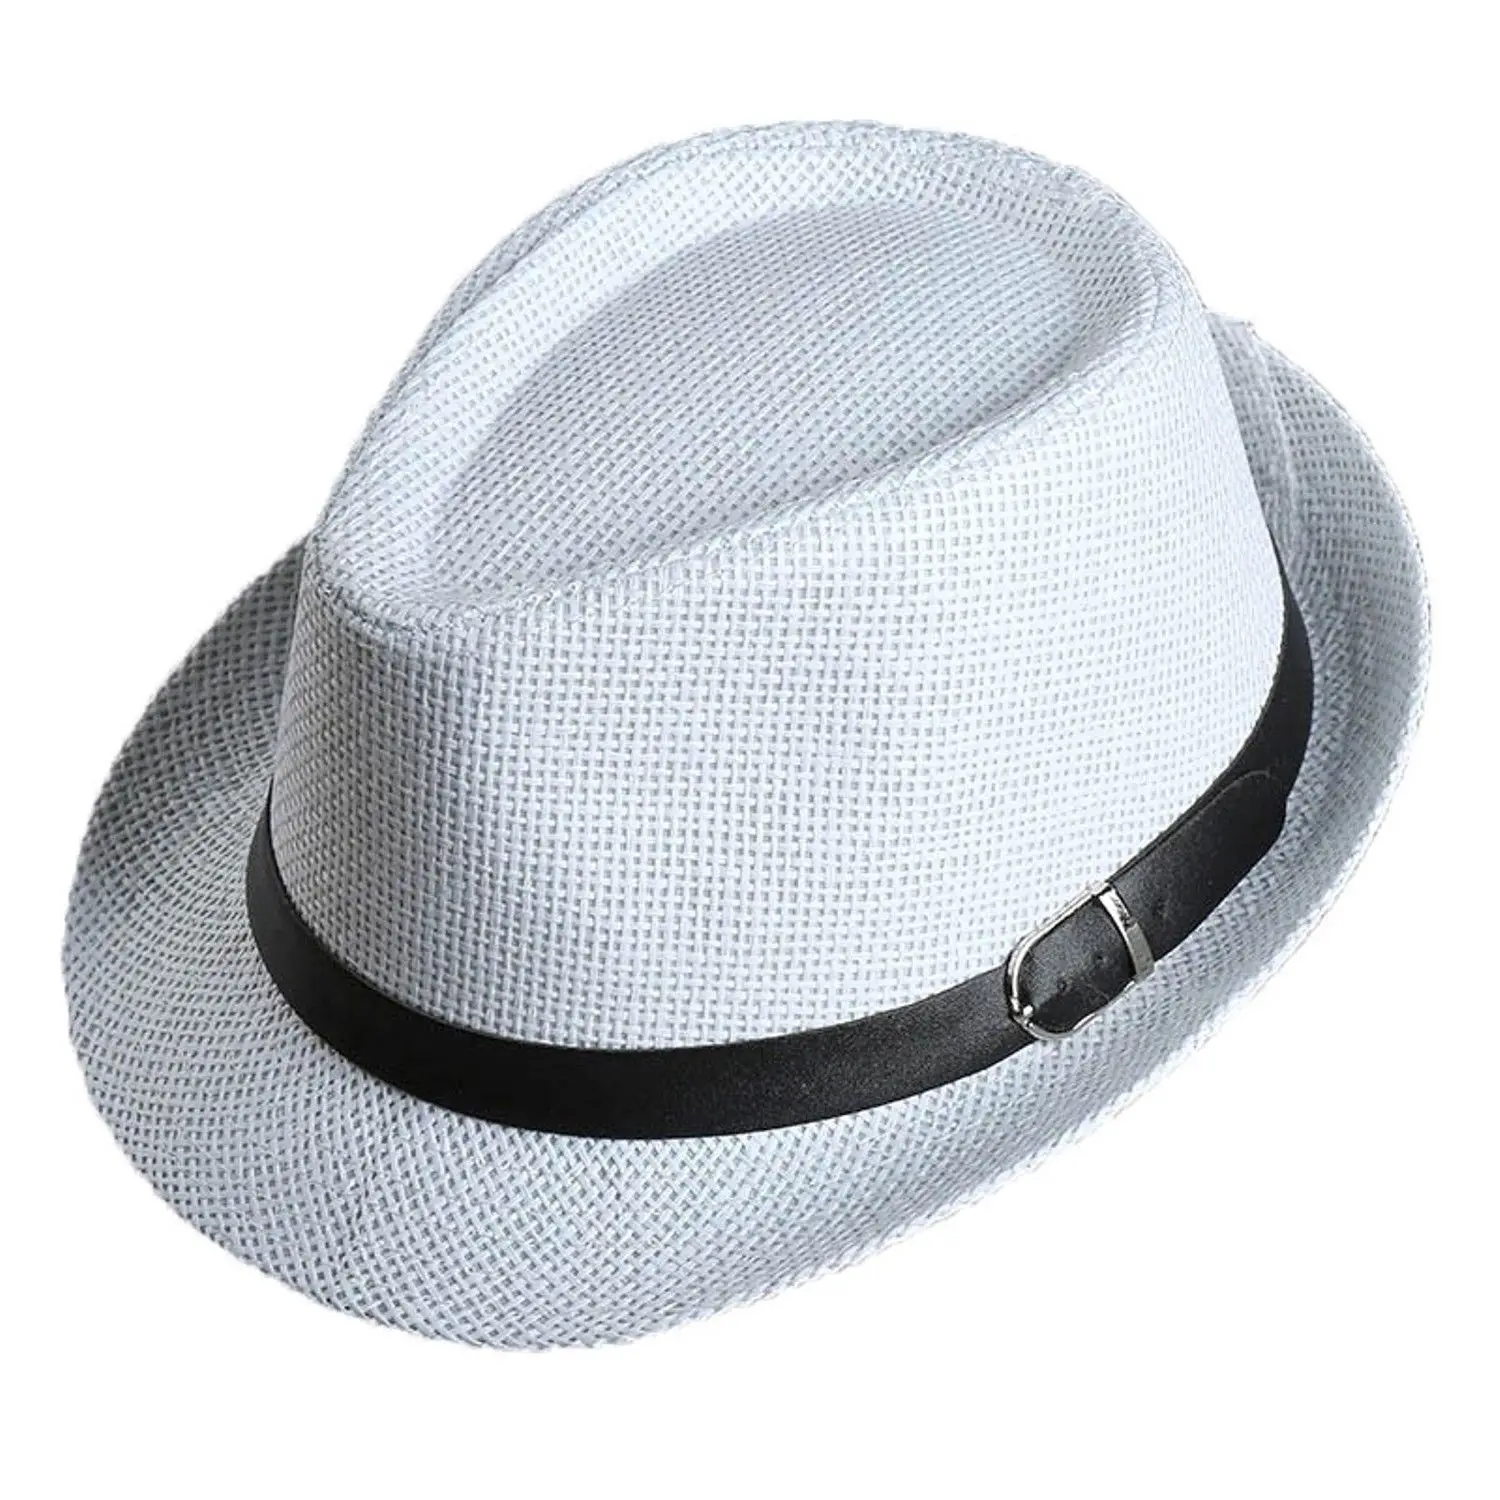 Chinese Sun Hat Brimmed Bamboo Straw Hat Tourism Farmer Unisex Fishing ...